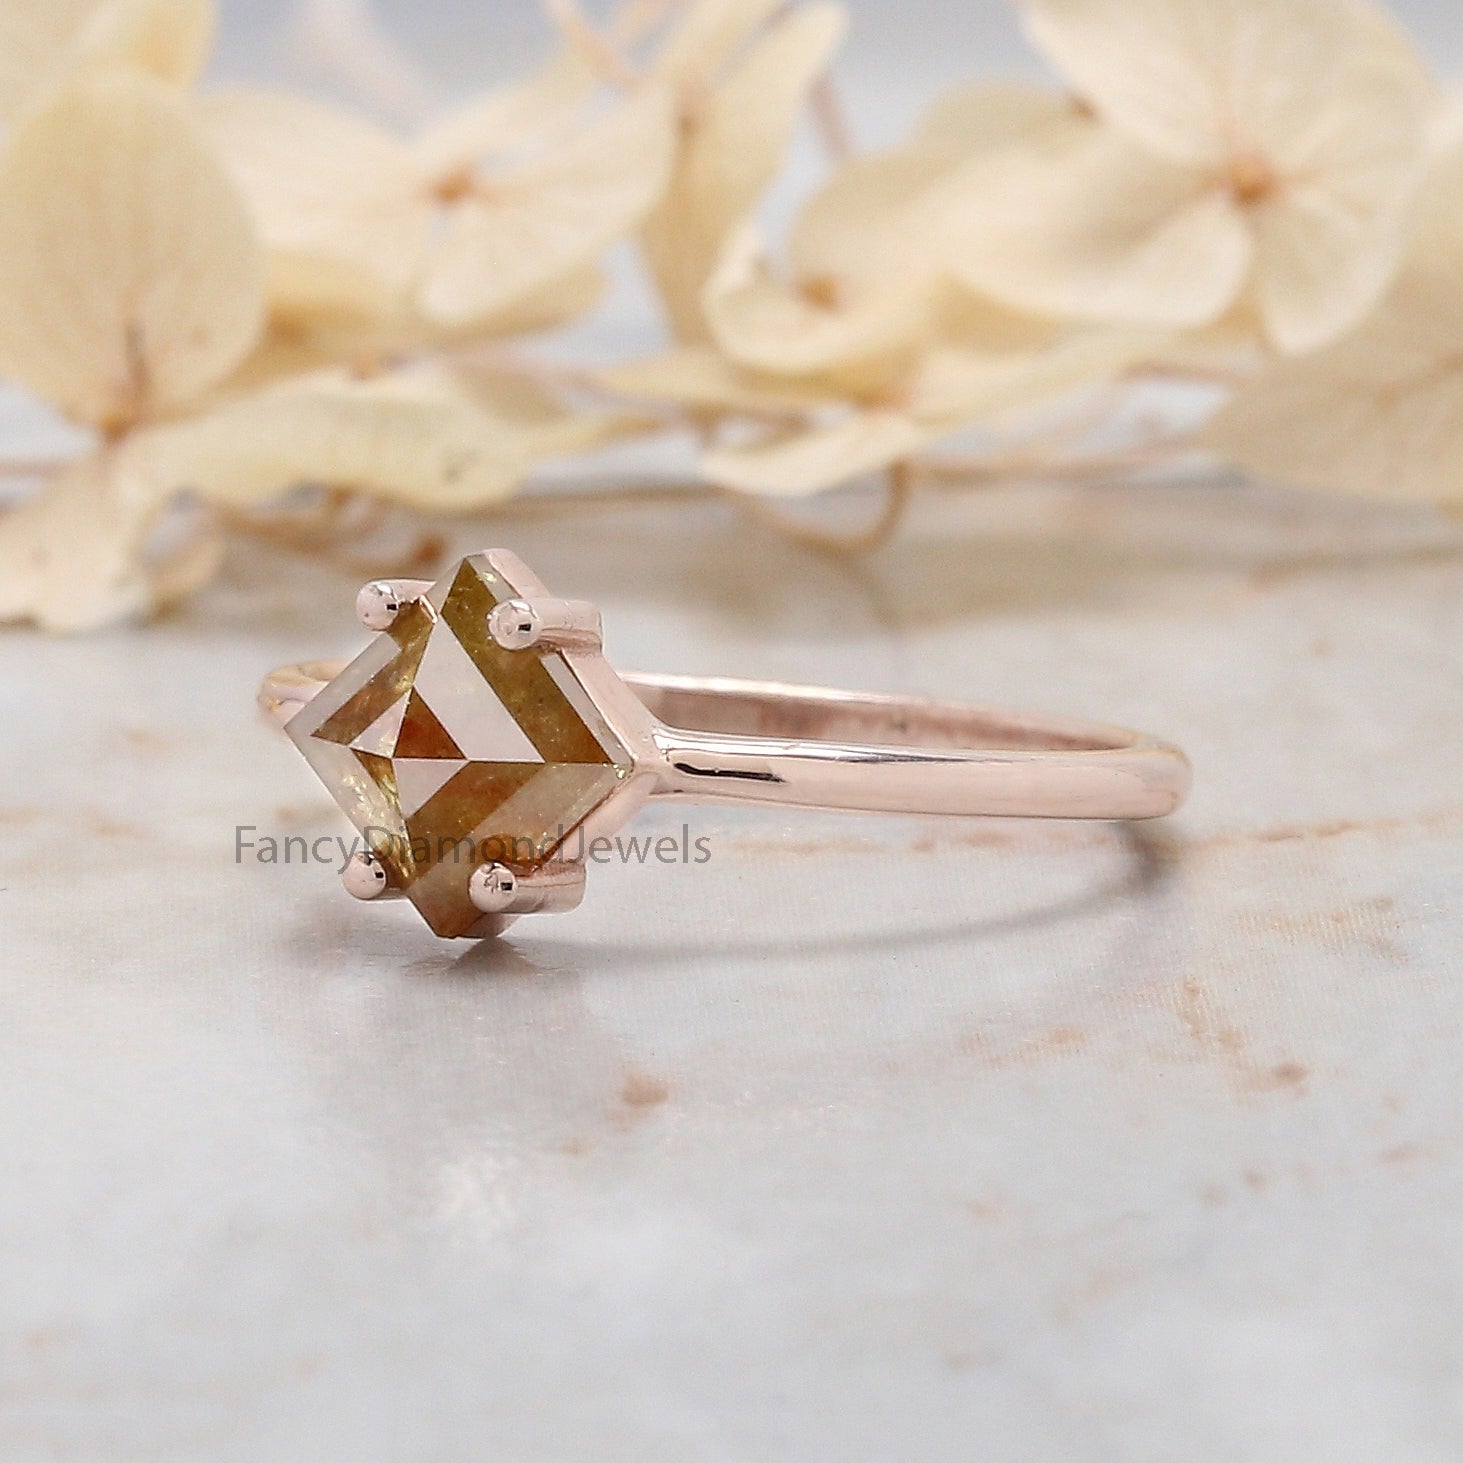 Kite Cut Yellow Color Diamond Ring 1.09 Ct 7.70 MM Kite Diamond Ring 14K Solid Rose Gold Silver Kite Engagement Ring Gift For Her QN768